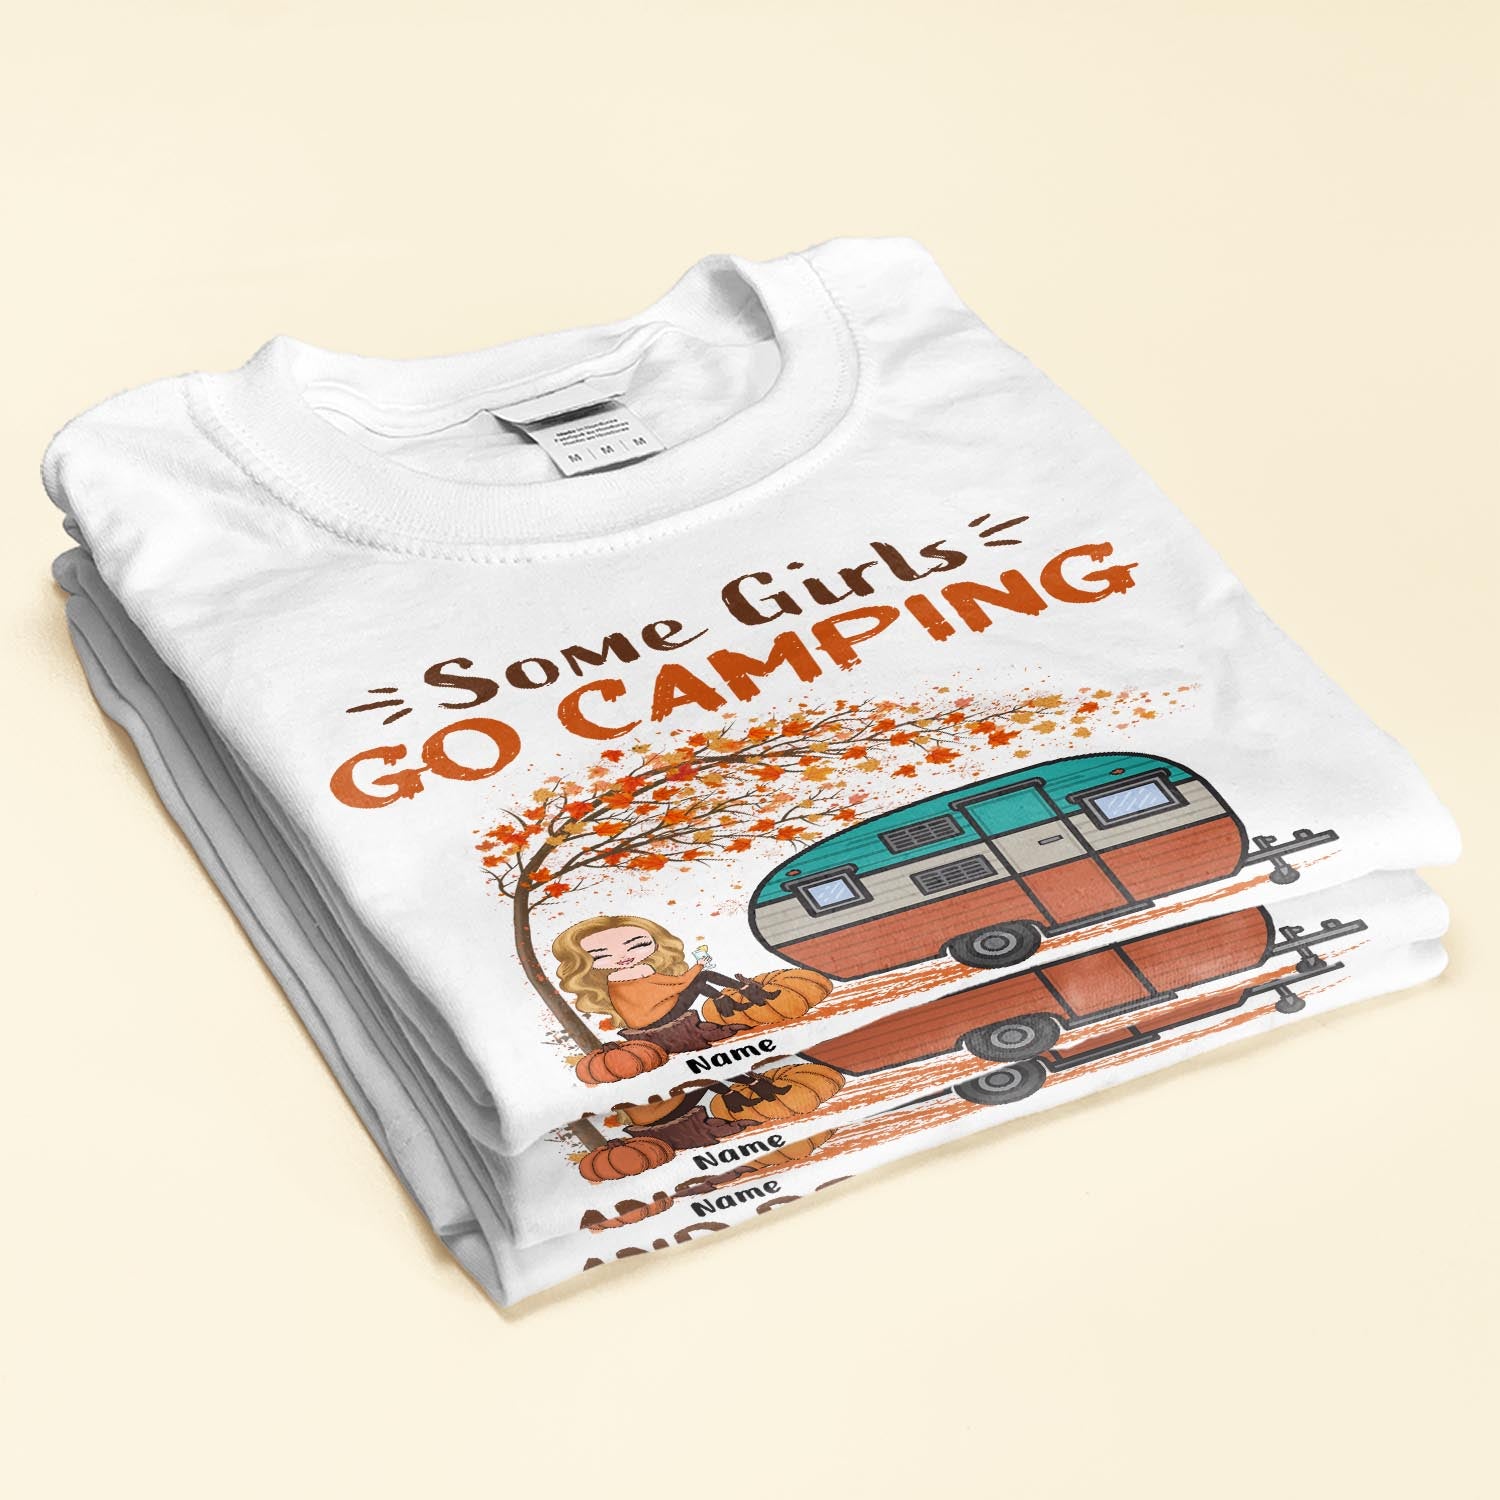 Some Girls Go Camping - Personalized Shirt - Fall Season Gift For Campers